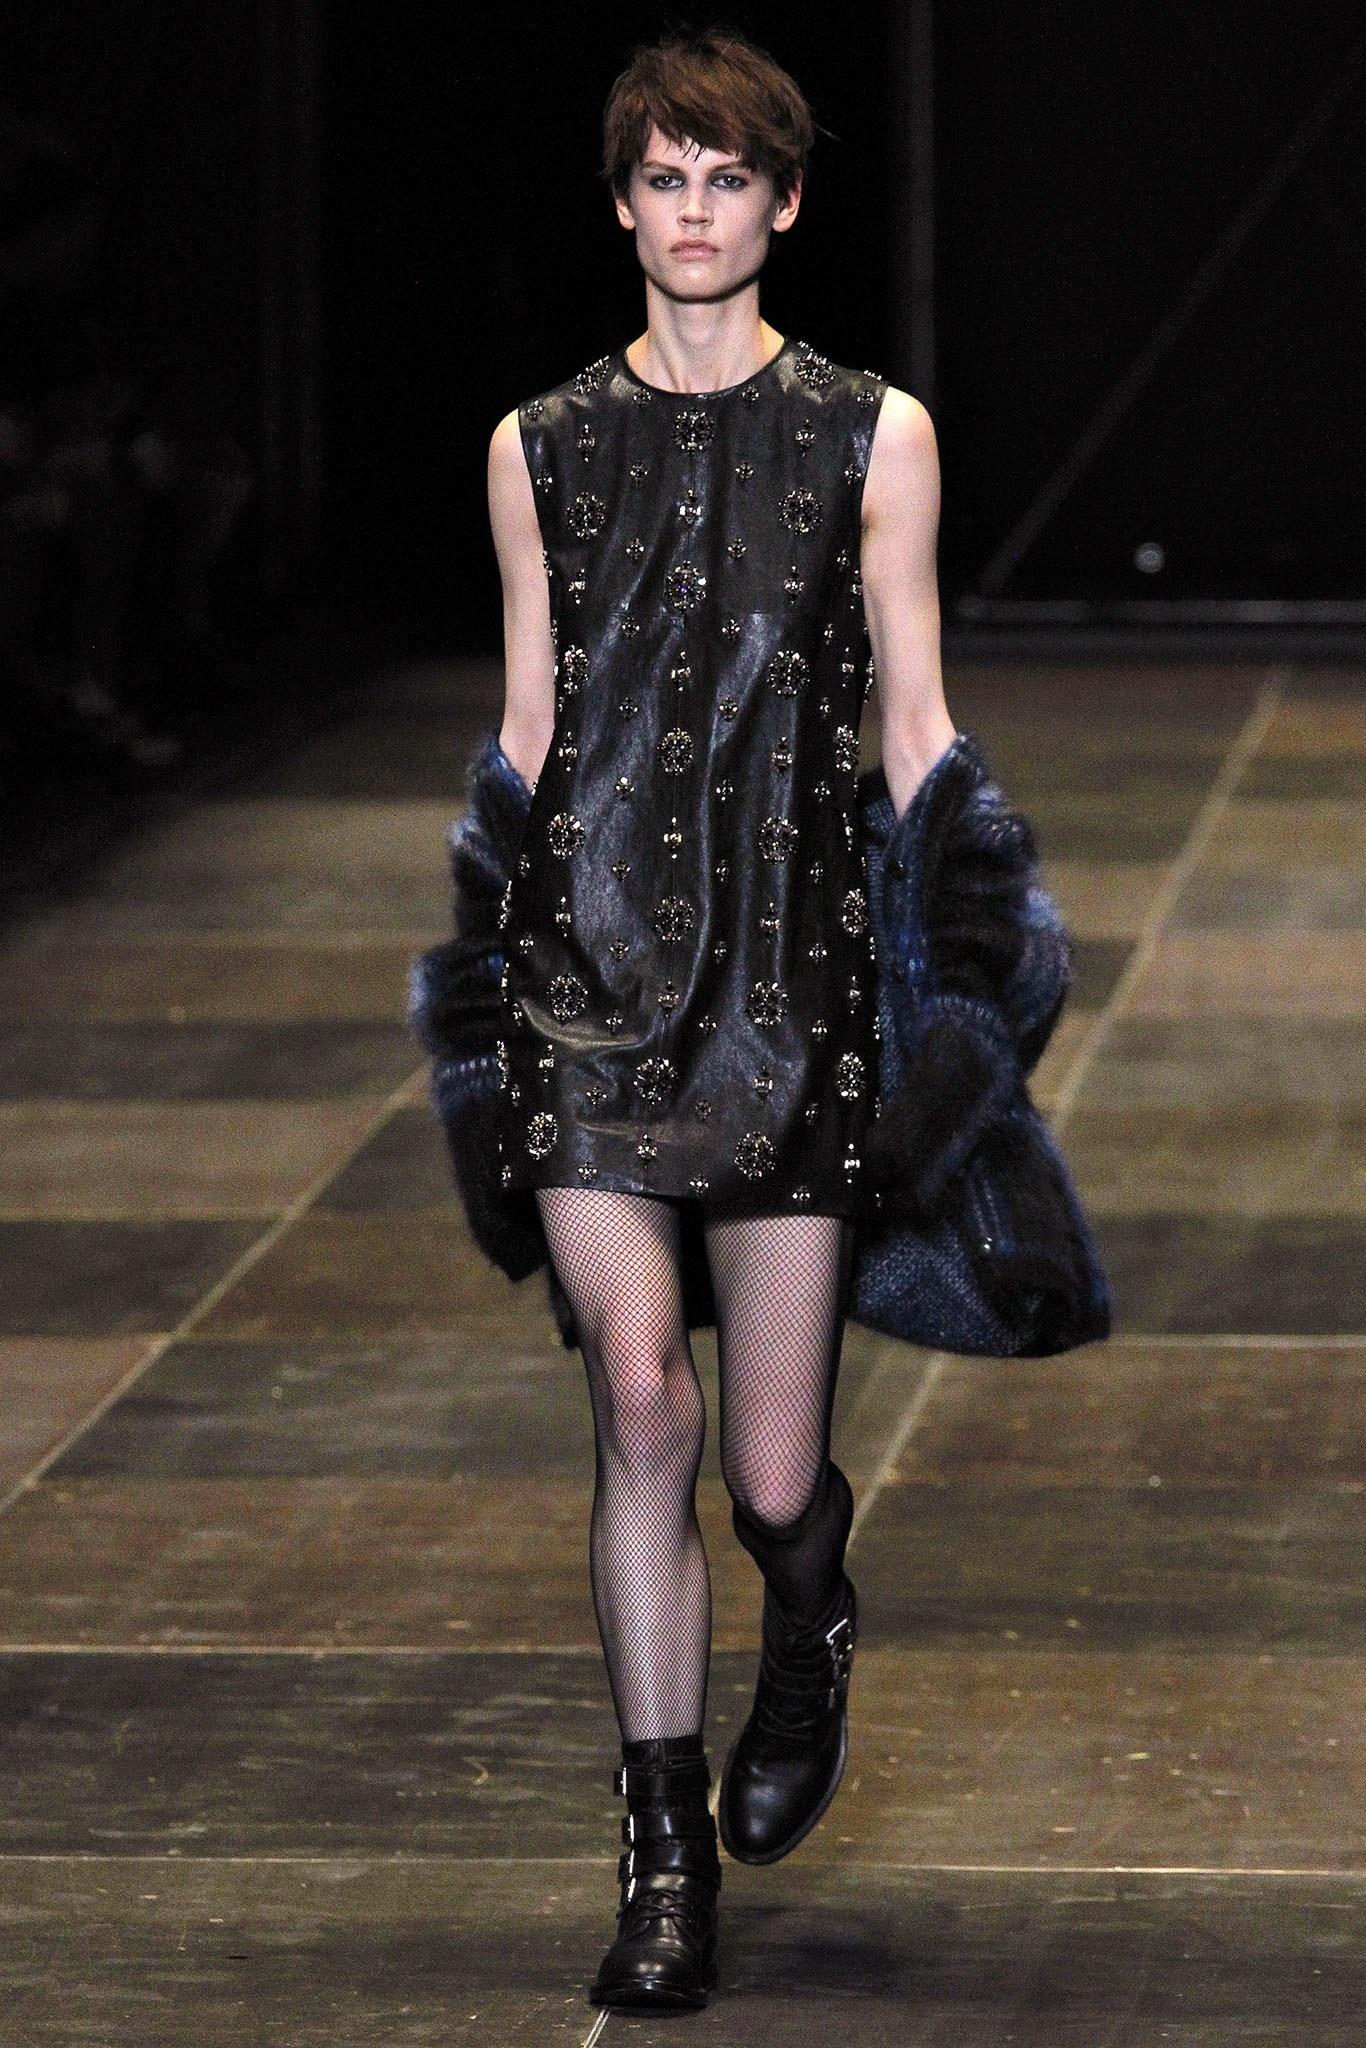 Saint Laurent Fall 2013 cocktail dress by Hedi Slimane comes in supple black leather with a round neckline, shift silhouette, and black and silver tone rhinestone and spike stud ornate embellishments throughout. Made in Italy.
 
Excellent Pre-Owned